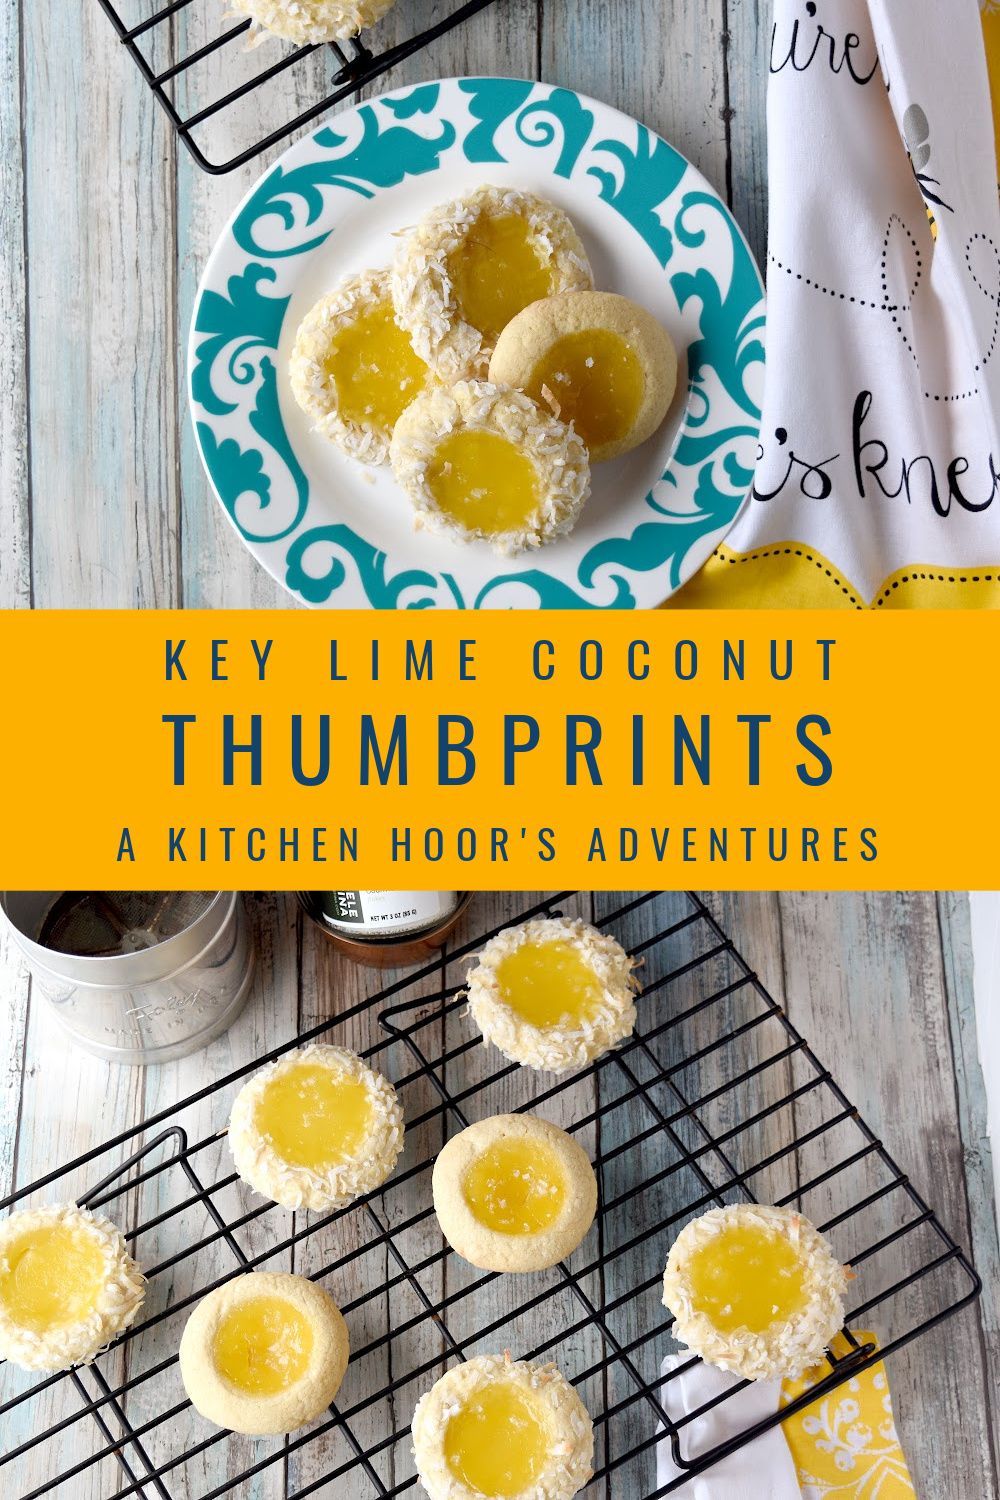 Key Lime Coconut Thumbprints Are Delicious for Easter